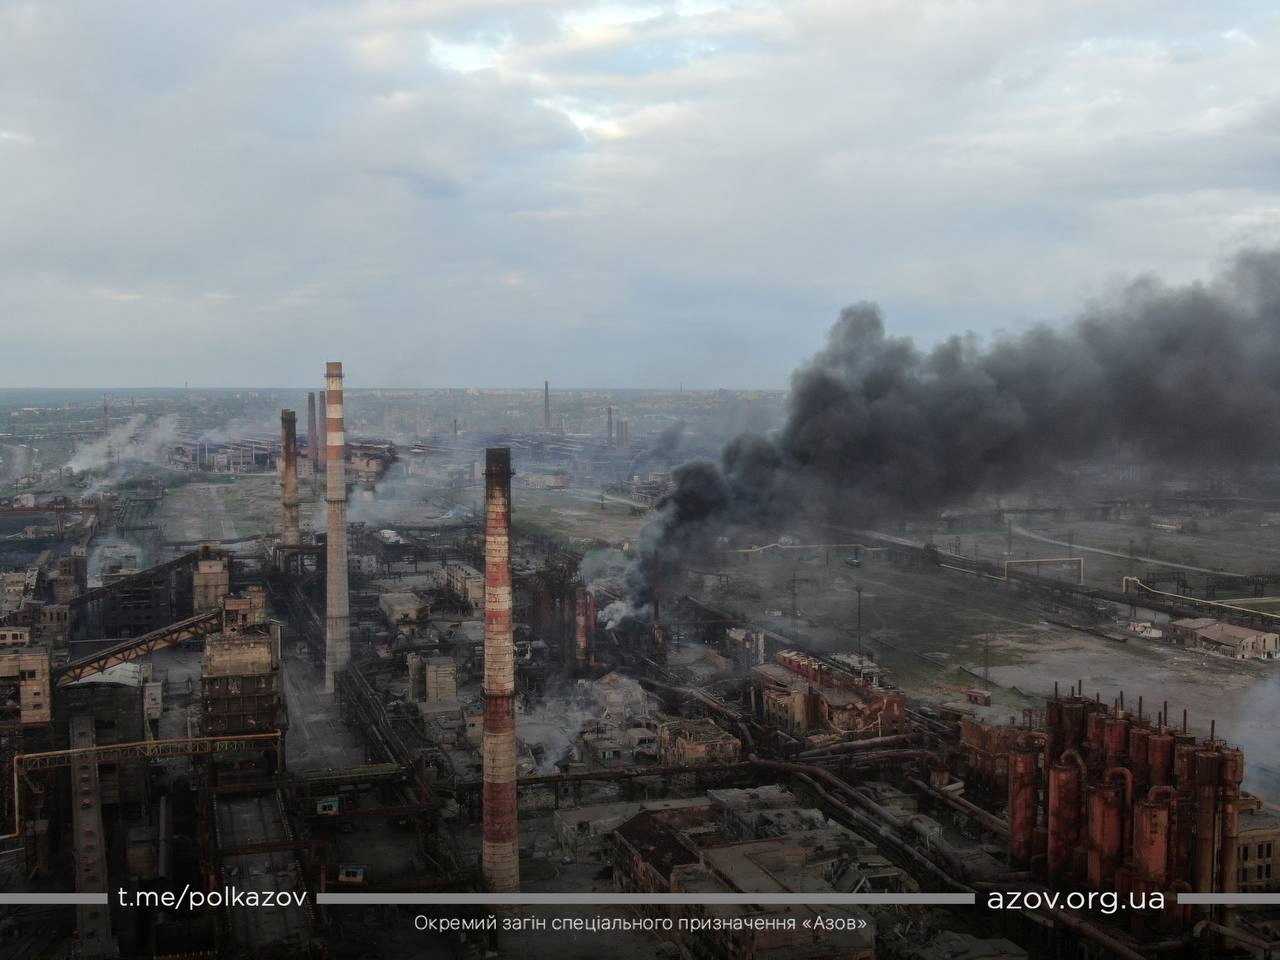 A view shows smoke rising at Azovstal Iron and Steel Works in Mariupol